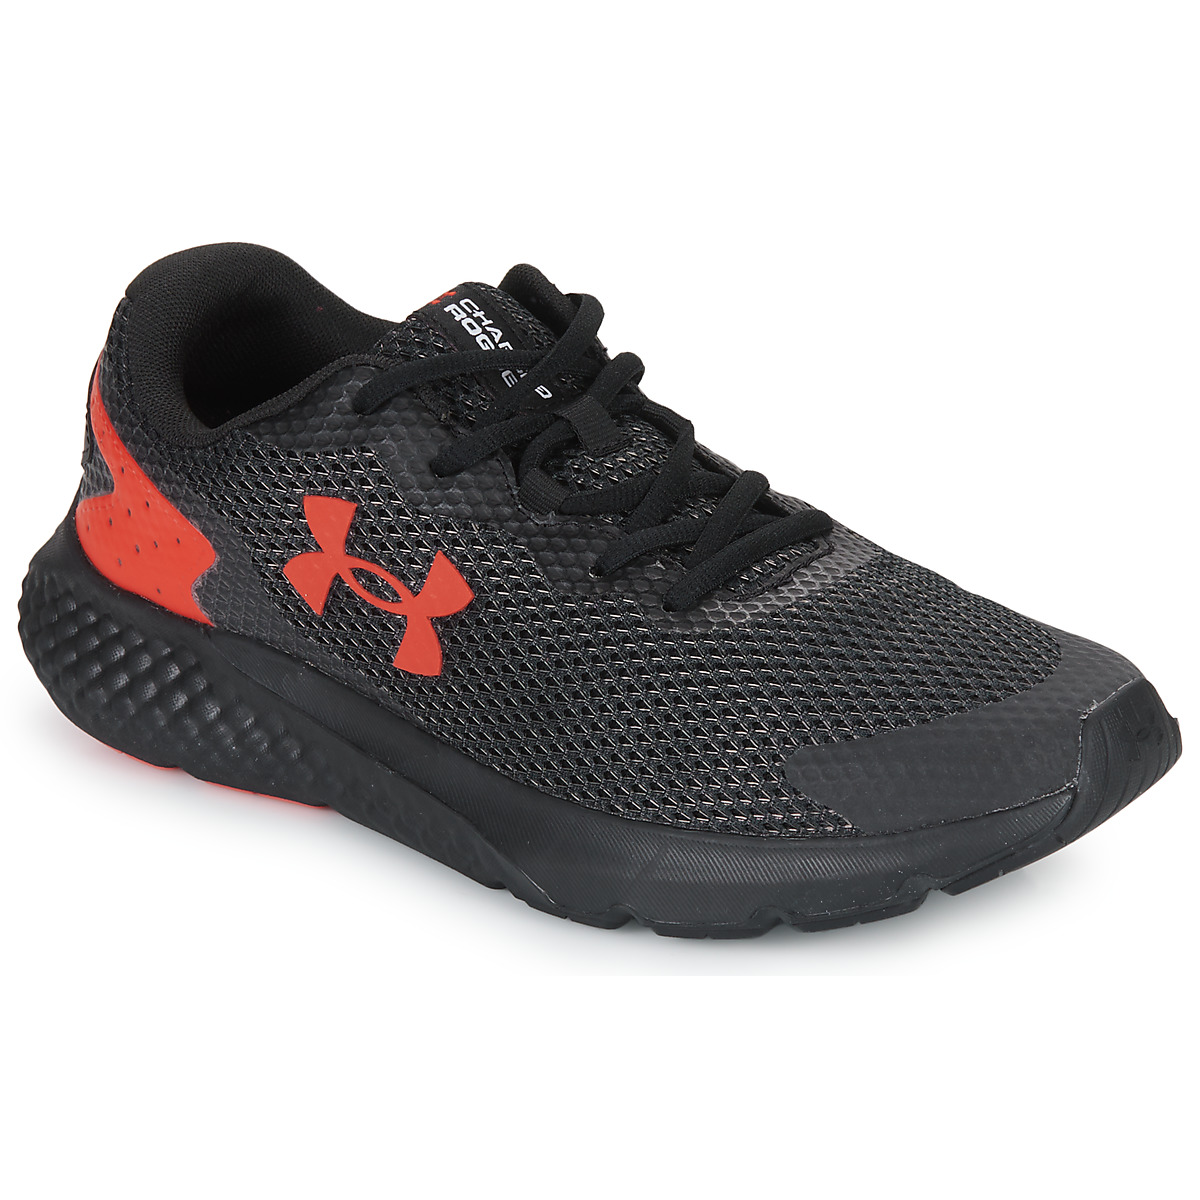 Under Armour Ua Charged Rogue 3 Reflect Black